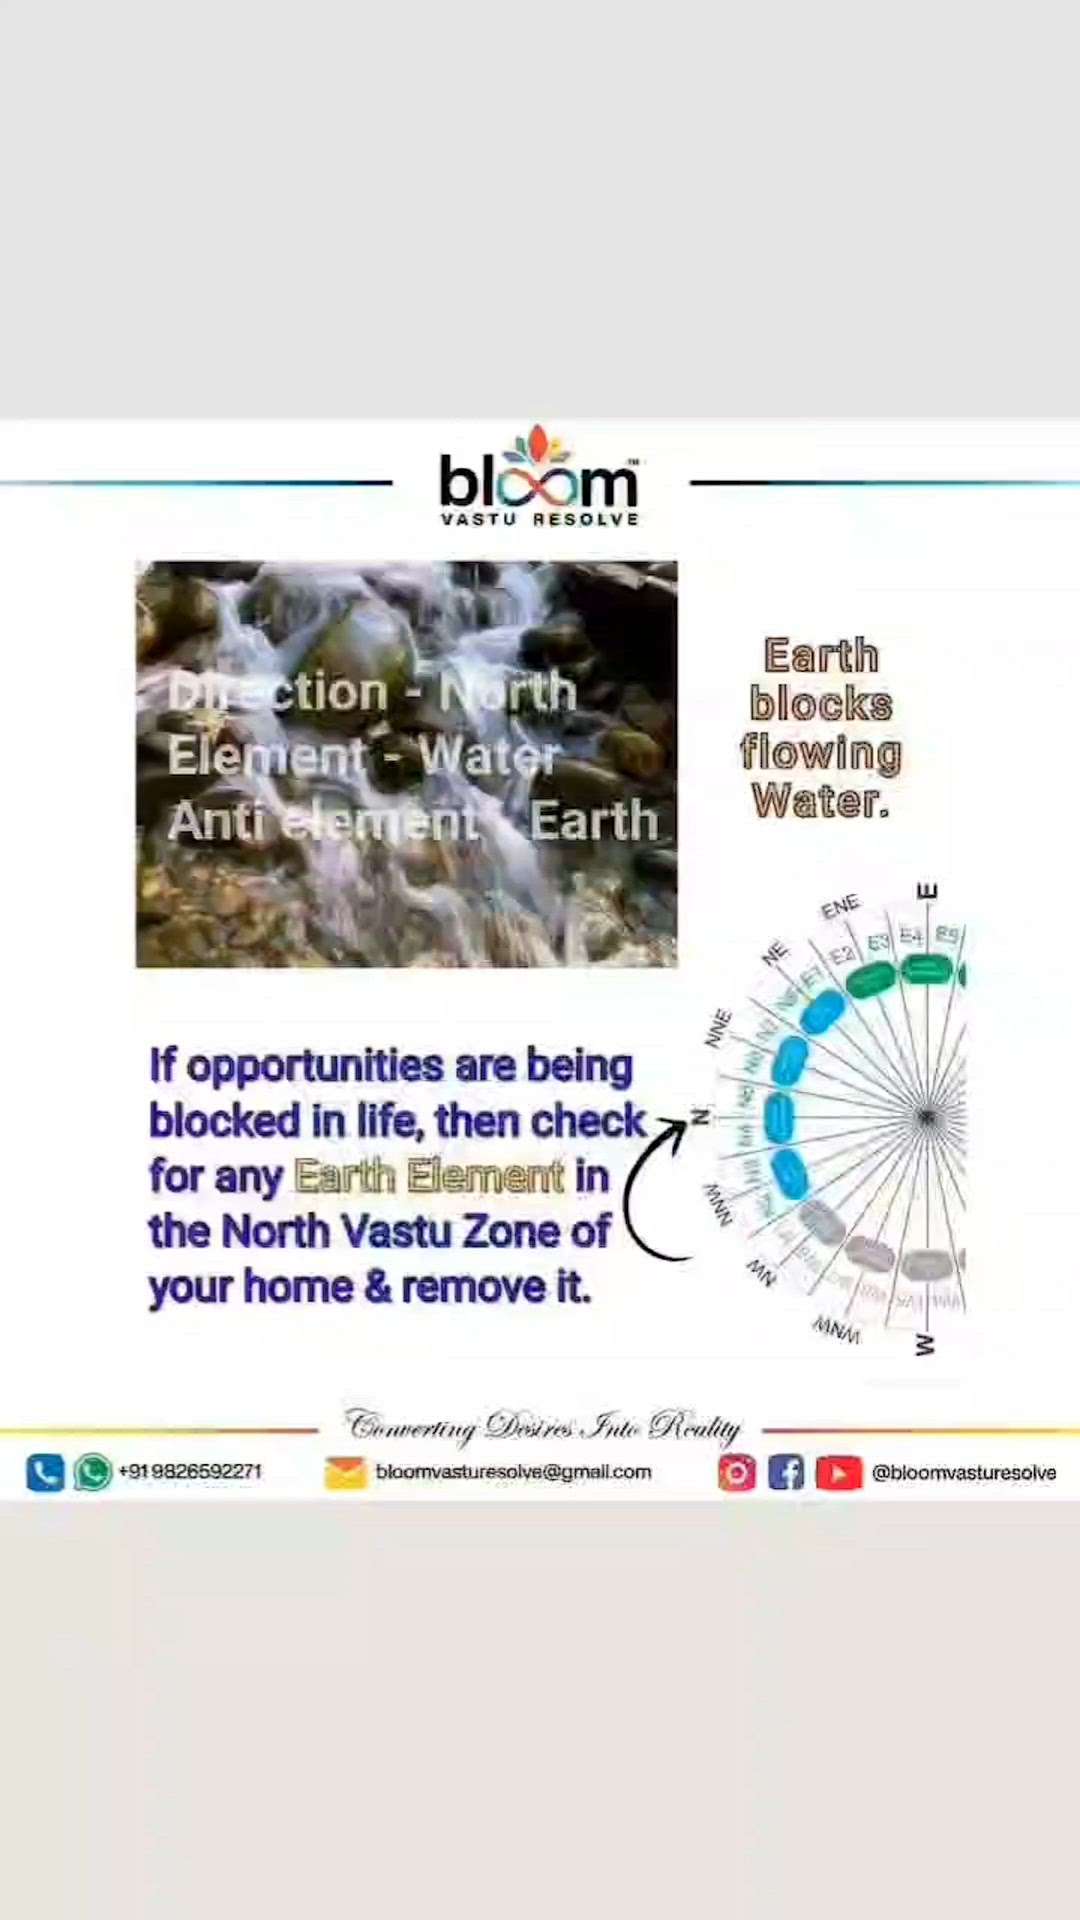 Your queries and comments are always welcome.
For more Vastu please follow @bloomvasturesolve
on YouTube, Instagram & Facebook
.
.
For personal consultation, feel free to contact certified MahaVastu Expert through
M - 9826592271
Or
bloomvasturesolve@gmail.com
#vastu #वास्तु #mahavastu #mahavastuexpert #bloomvasturesolve  #vastureels #vastulogy #vastuexpert  #vasturemedies  #vastuforhome #vastuforpeace #vastudosh #numerology #vastuforgrowth #numerology #northzone #money #opportunities #vastudosh